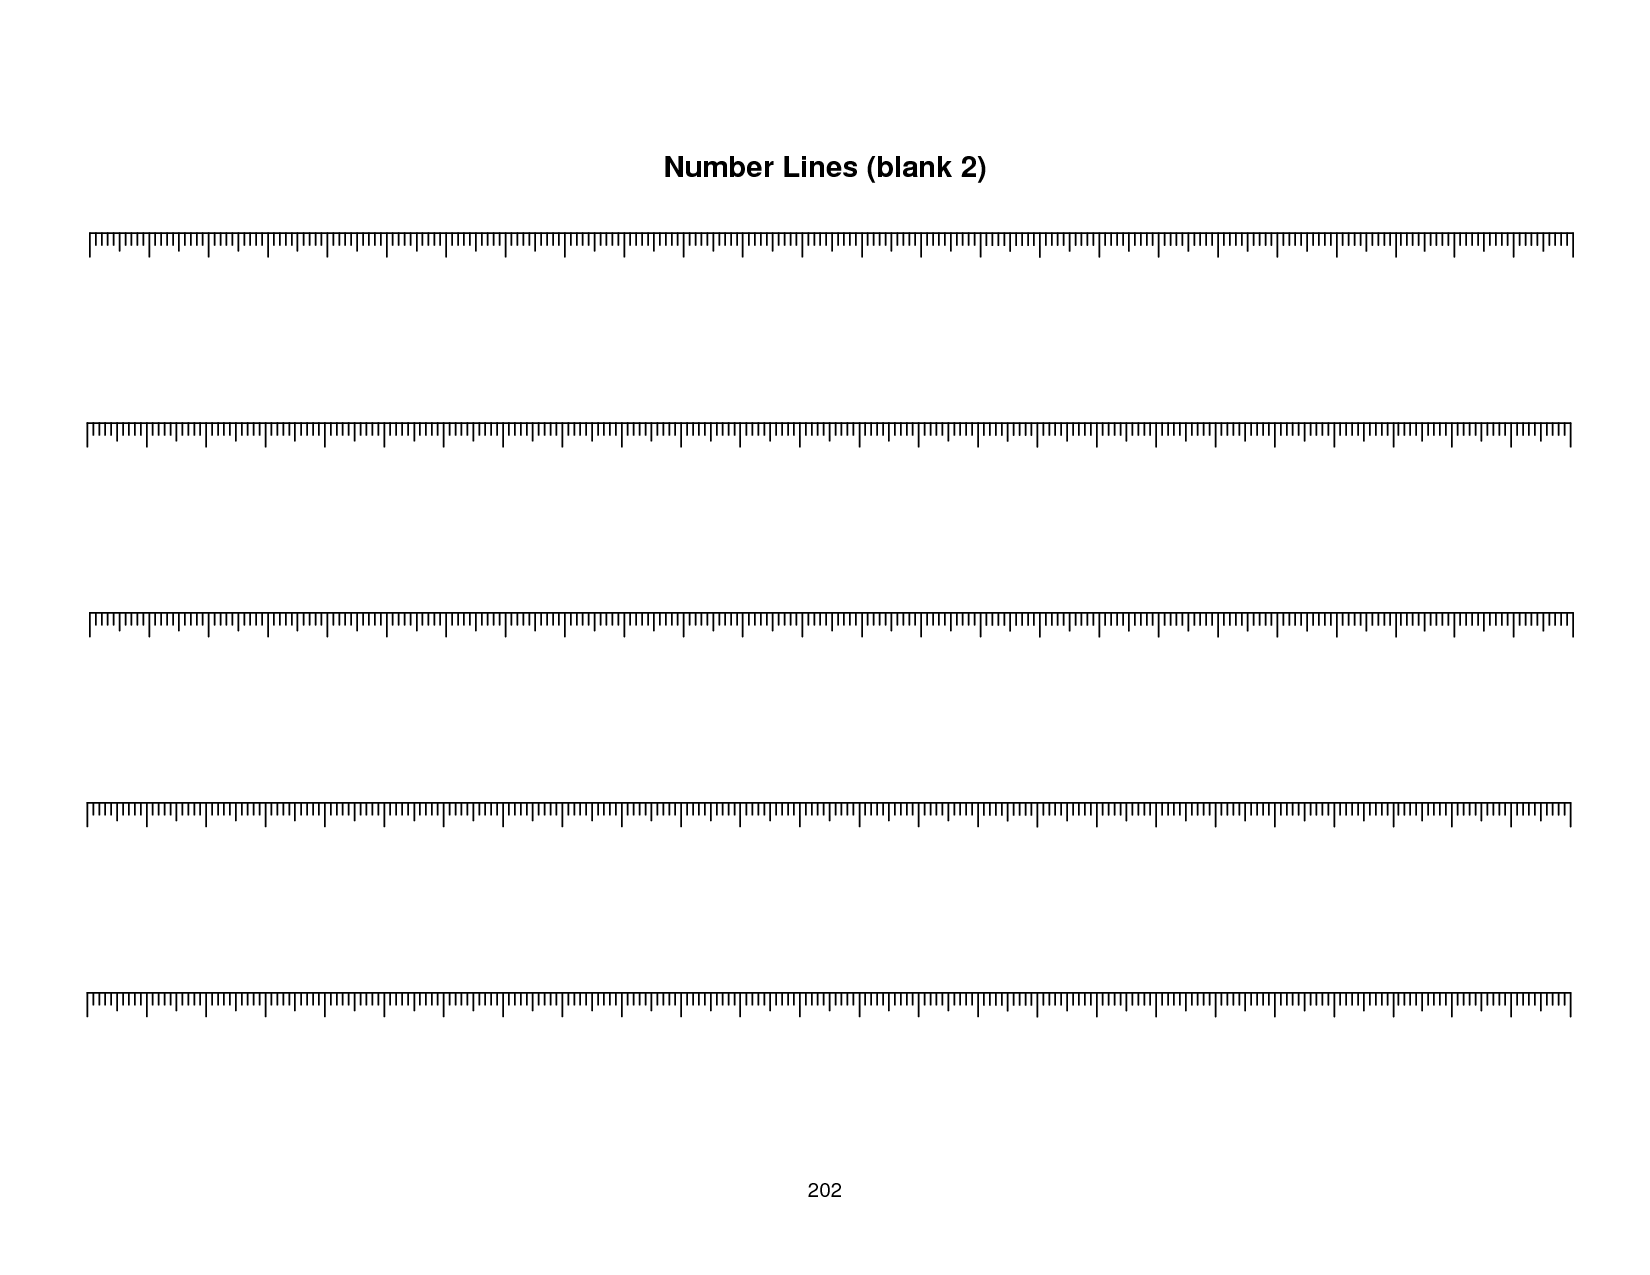 8-best-images-of-printable-blank-number-line-template-blank-number